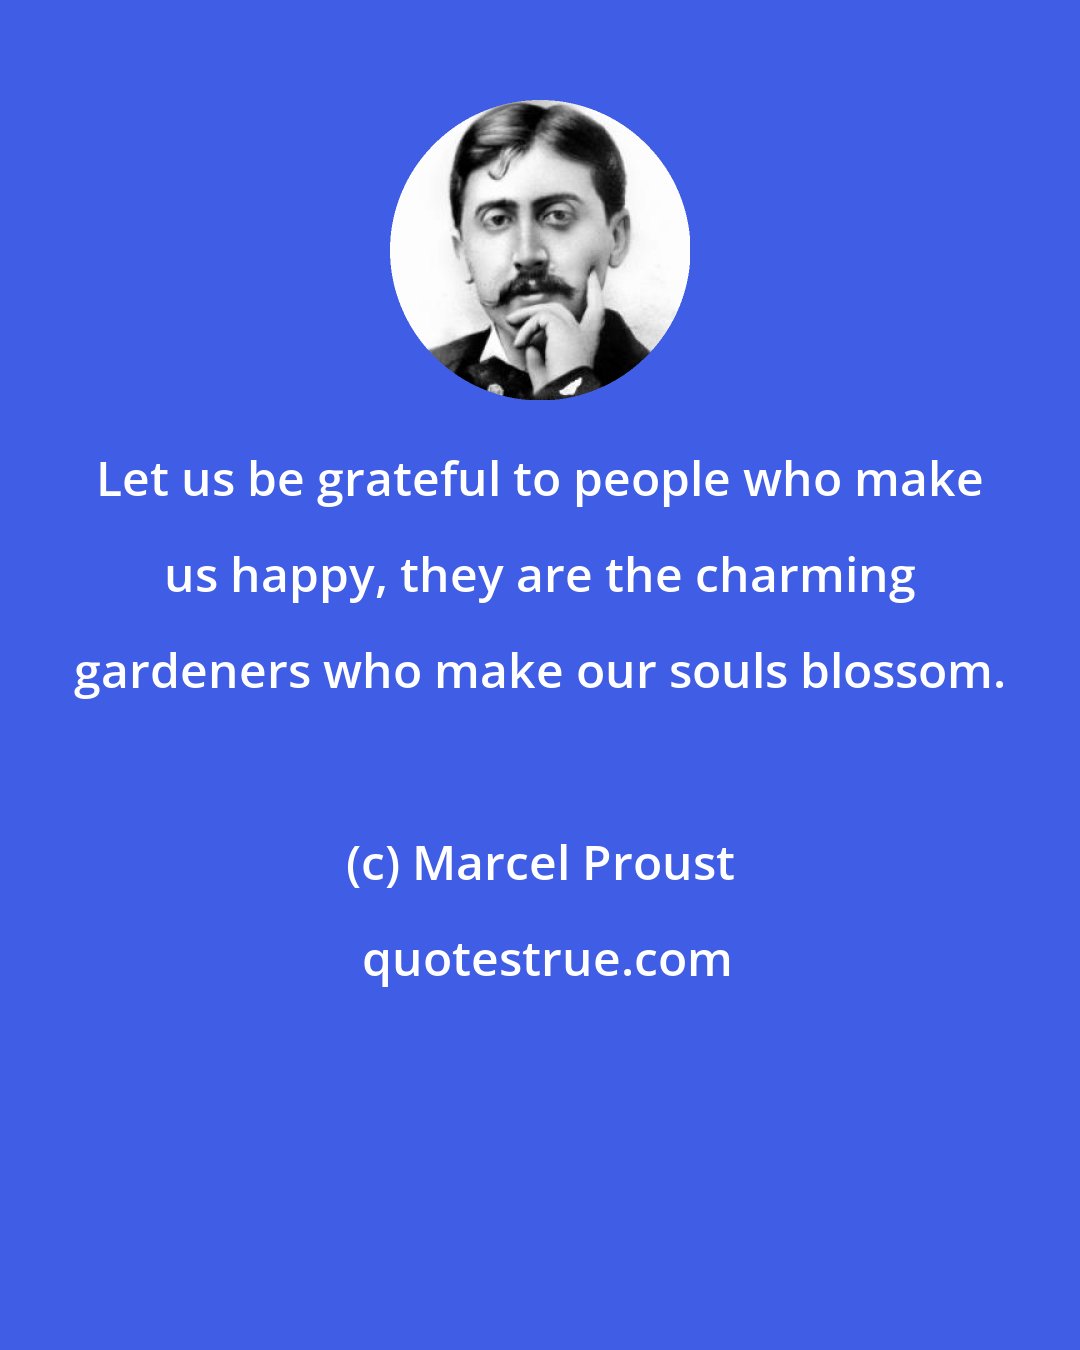 Marcel Proust: Let us be grateful to people who make us happy, they are the charming gardeners who make our souls blossom.